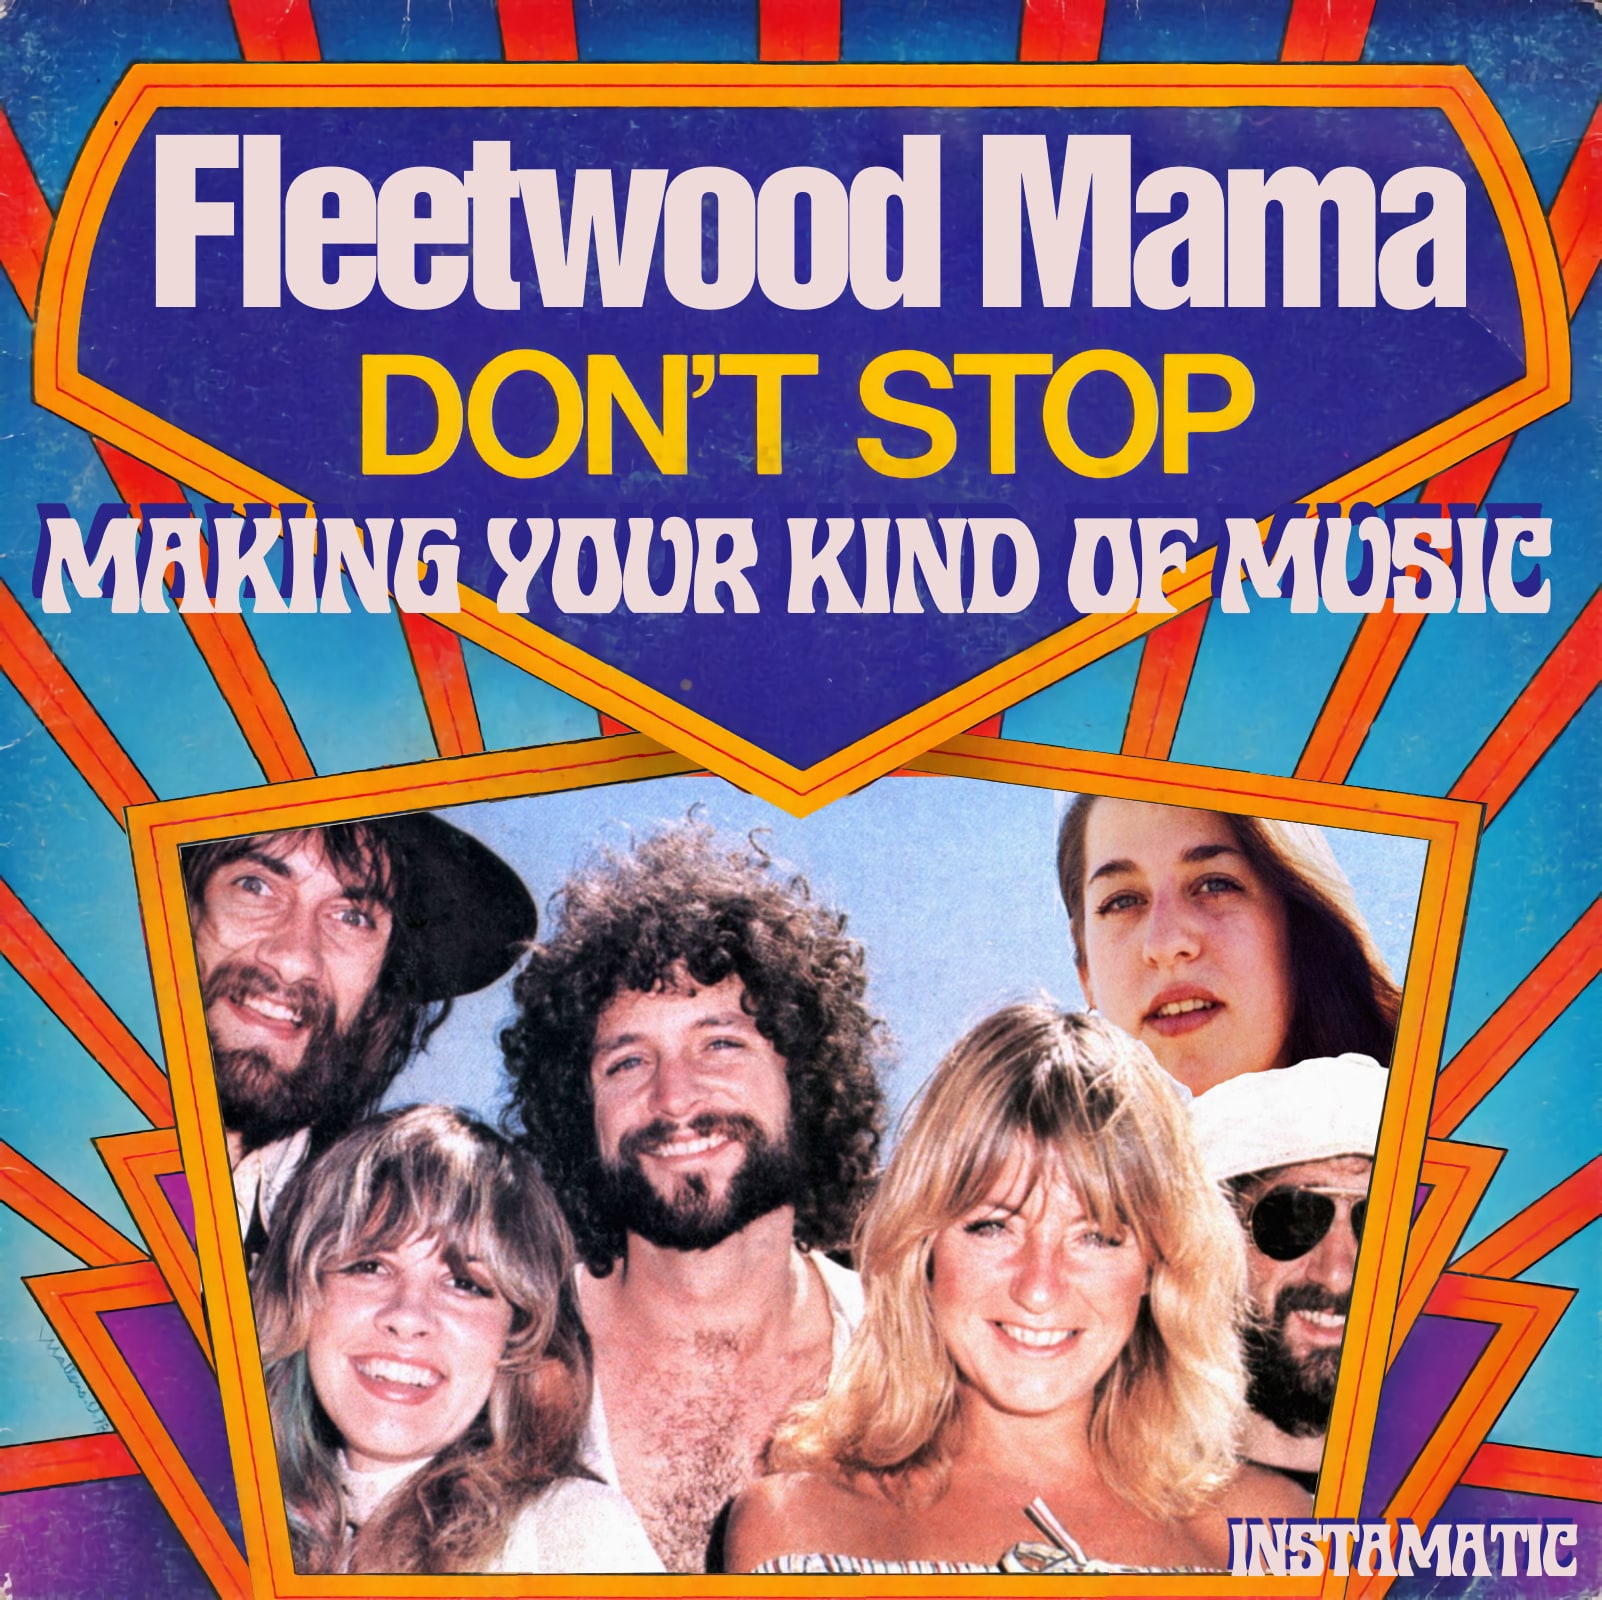 RIP Christine McVie of Fleetwood Mac – Don’t Stop Making Your Kind Of Music